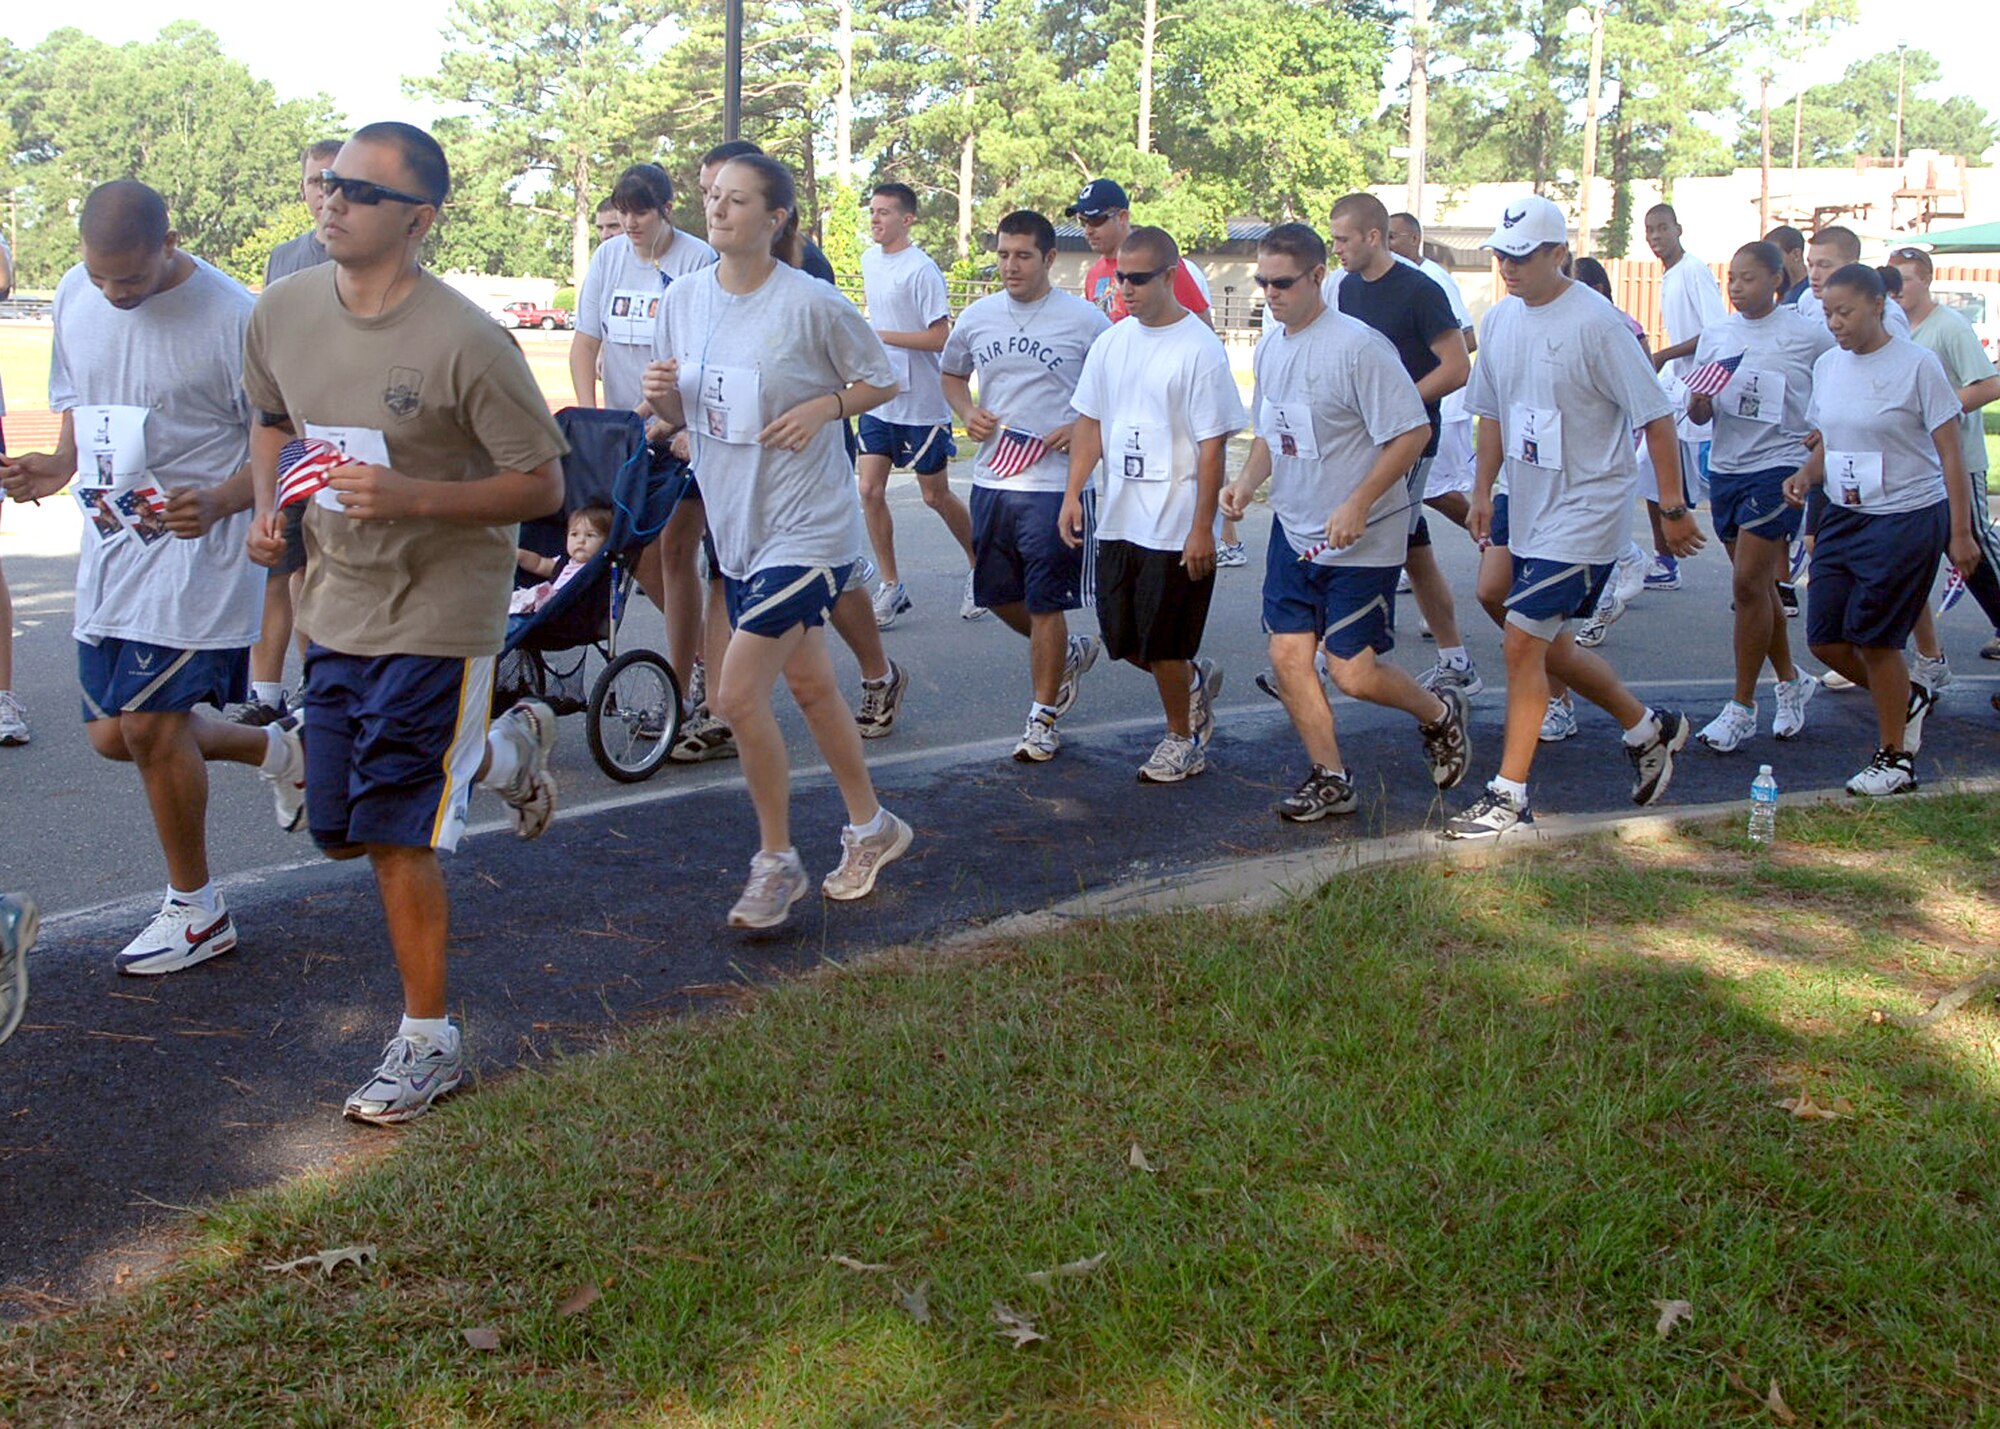 Runners get their start on a two-mile event called Run for the Fallen on Seymour Johnson Air Force Base, NC, August 24. Run for the Fallen was held to honor military members who lost their lives in Operation Iraqi Freedom and Operation Enduring Freedom. Participants wore running bibs with the name, rank, branch of service and picture of these fallen military members. (U.S. Air Force photo by Airman 1st Class Makenzie Lang)